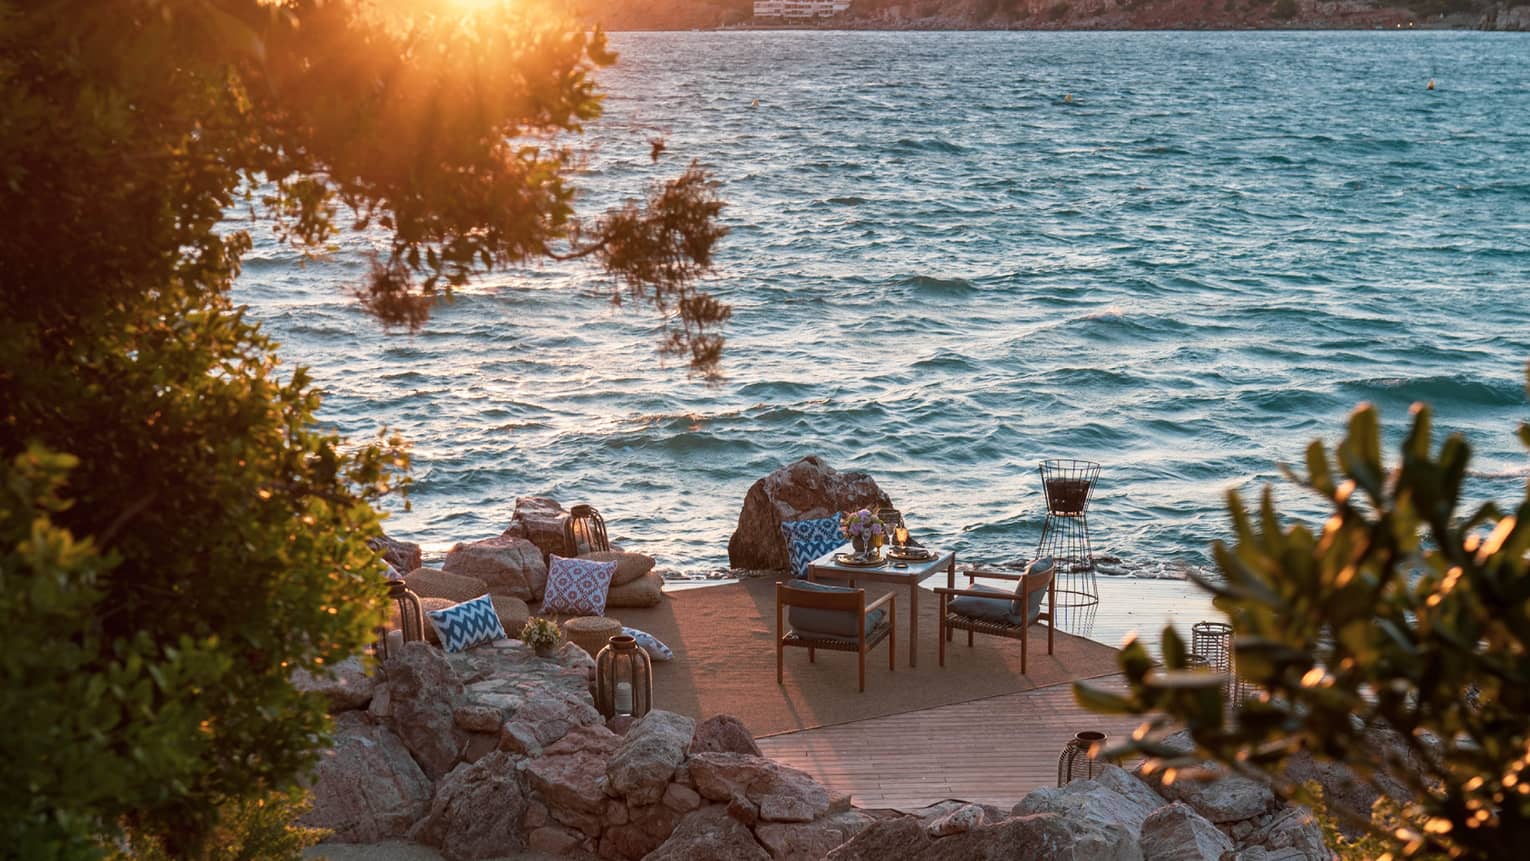 From tree-lined stairs, a furnished patio, including table set for two beside rippling water  and sun setting over a distant isle